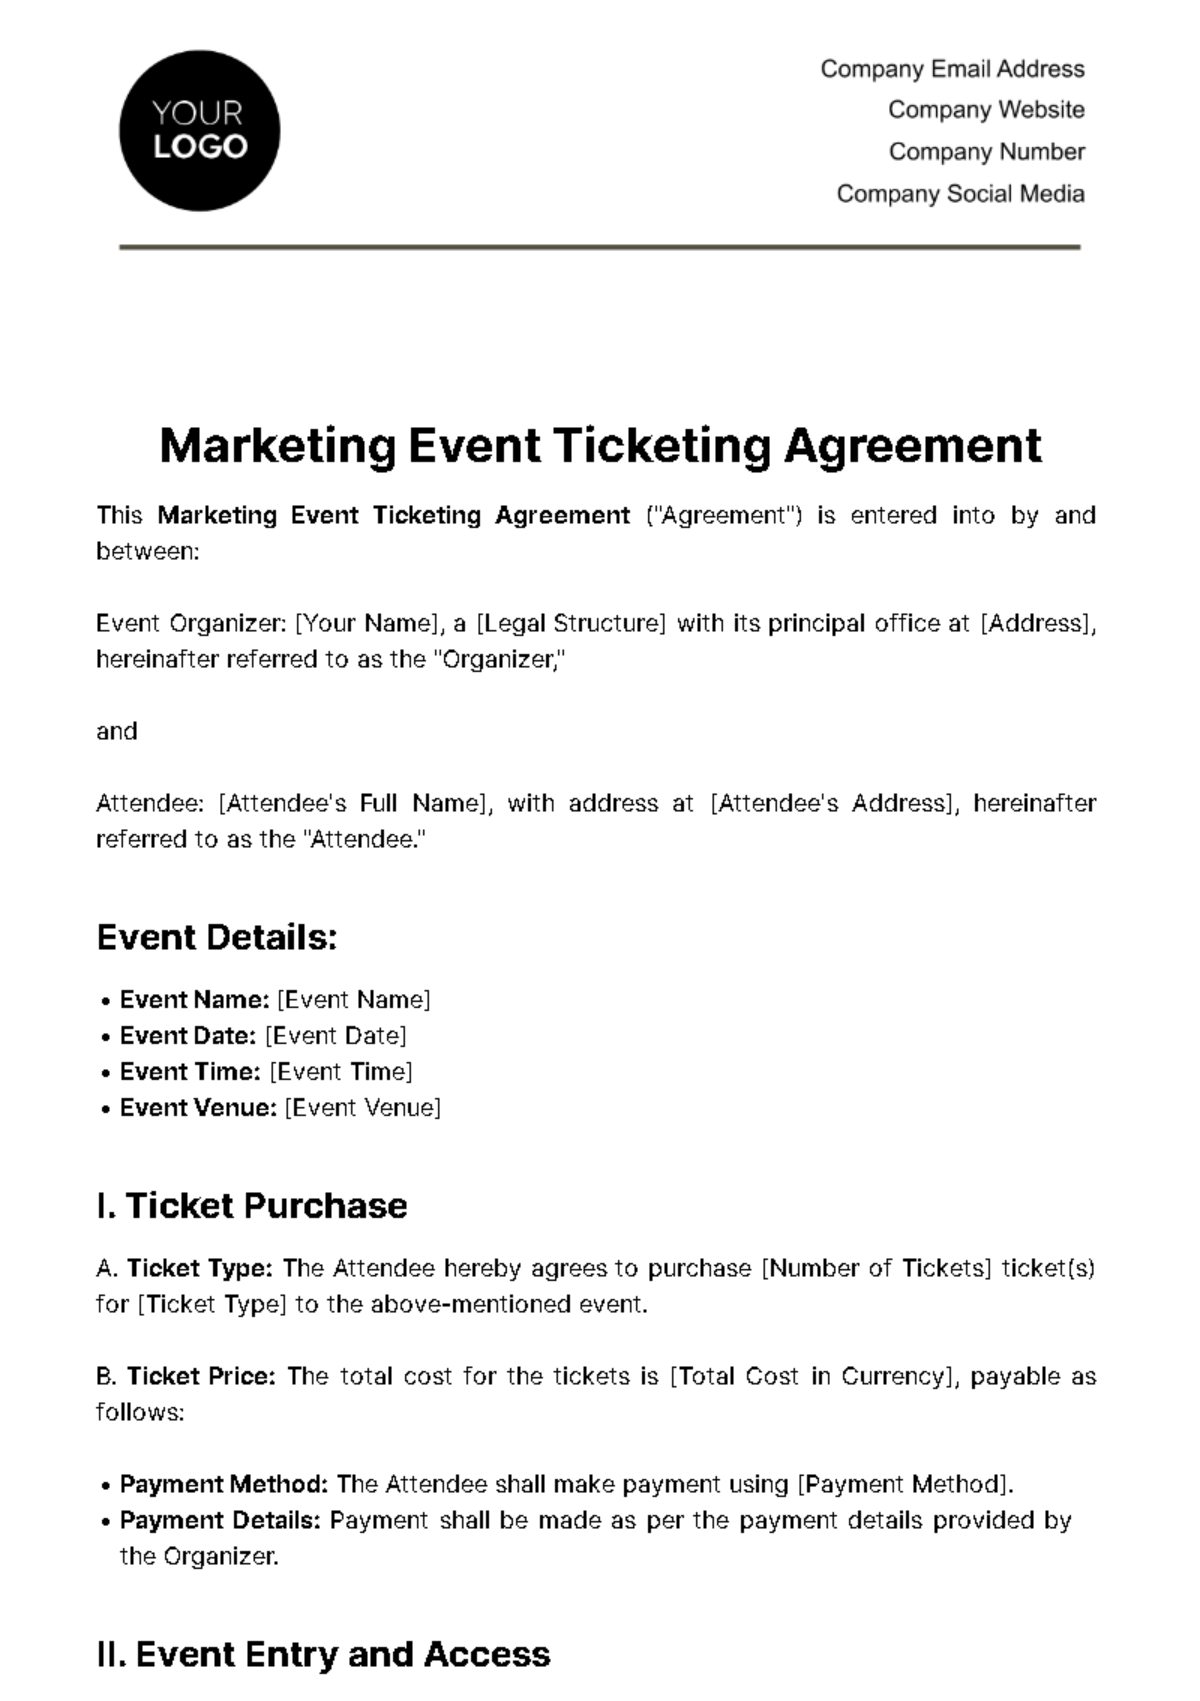 Free Marketing Event Ticketing Agreement Template